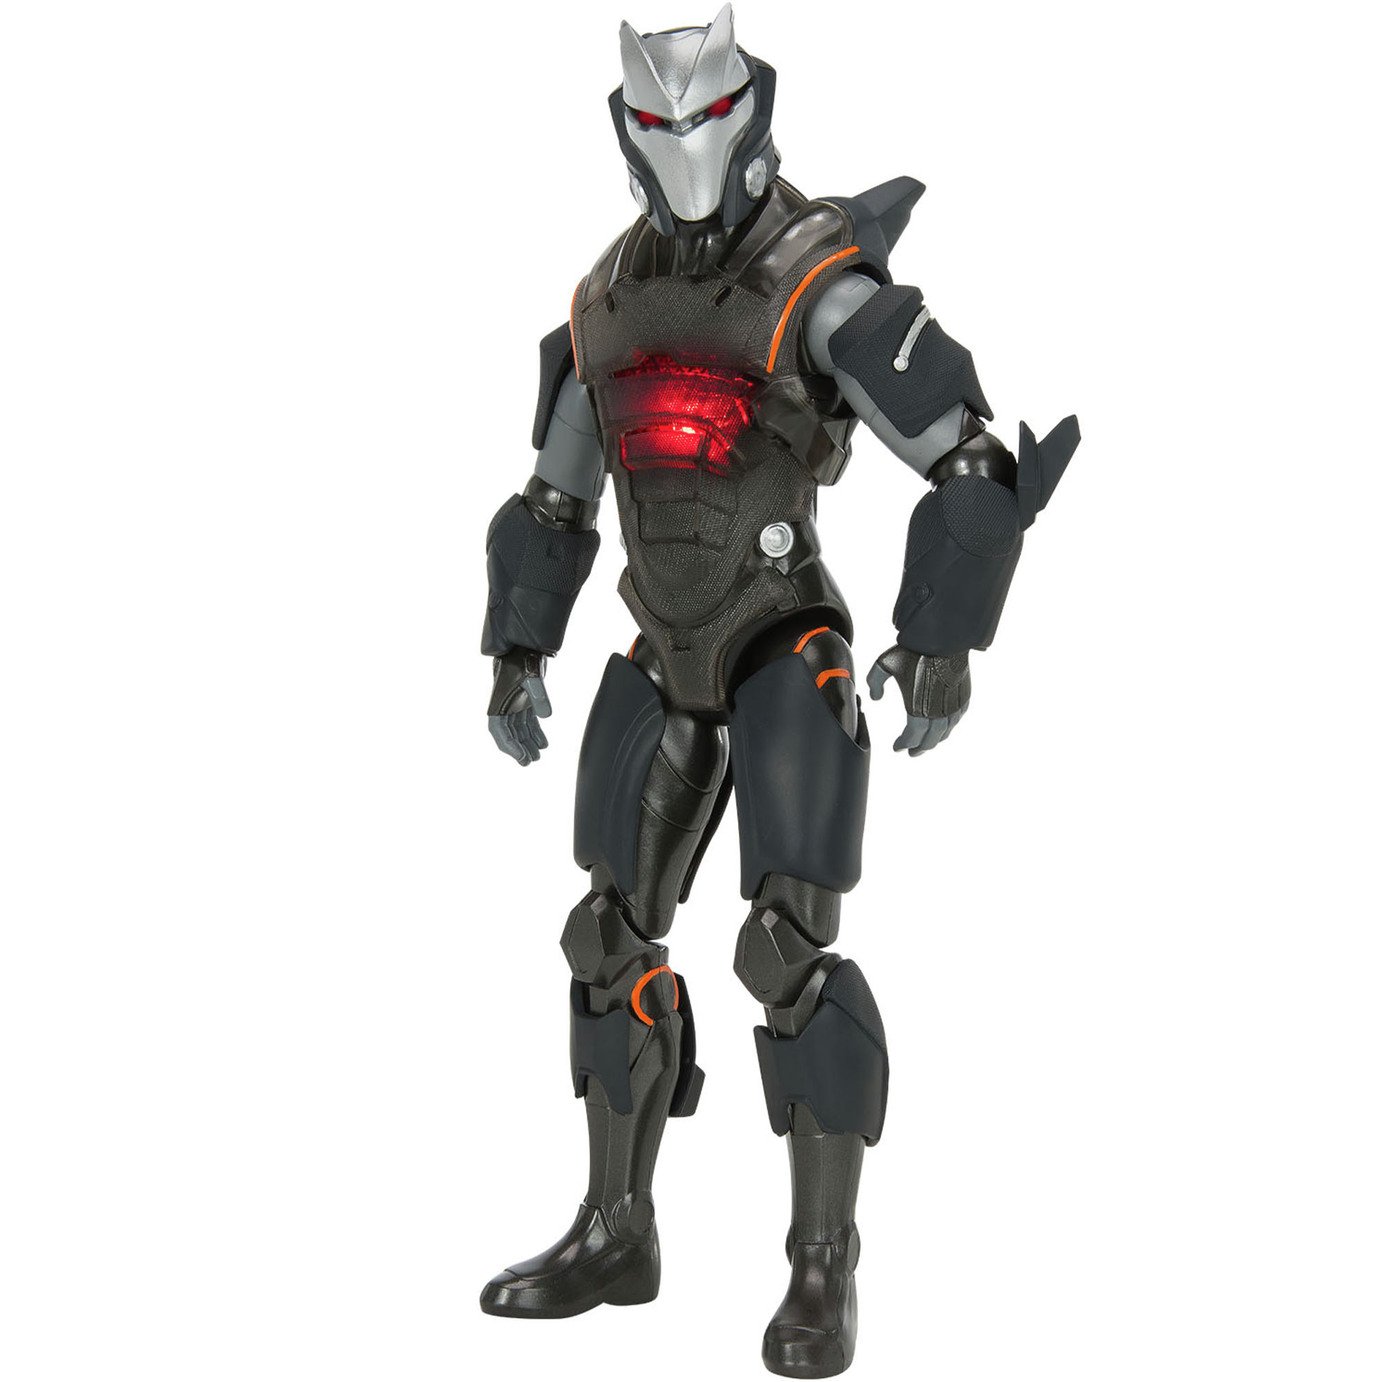 Victory Series Omega 12in Feature Action Figure Review